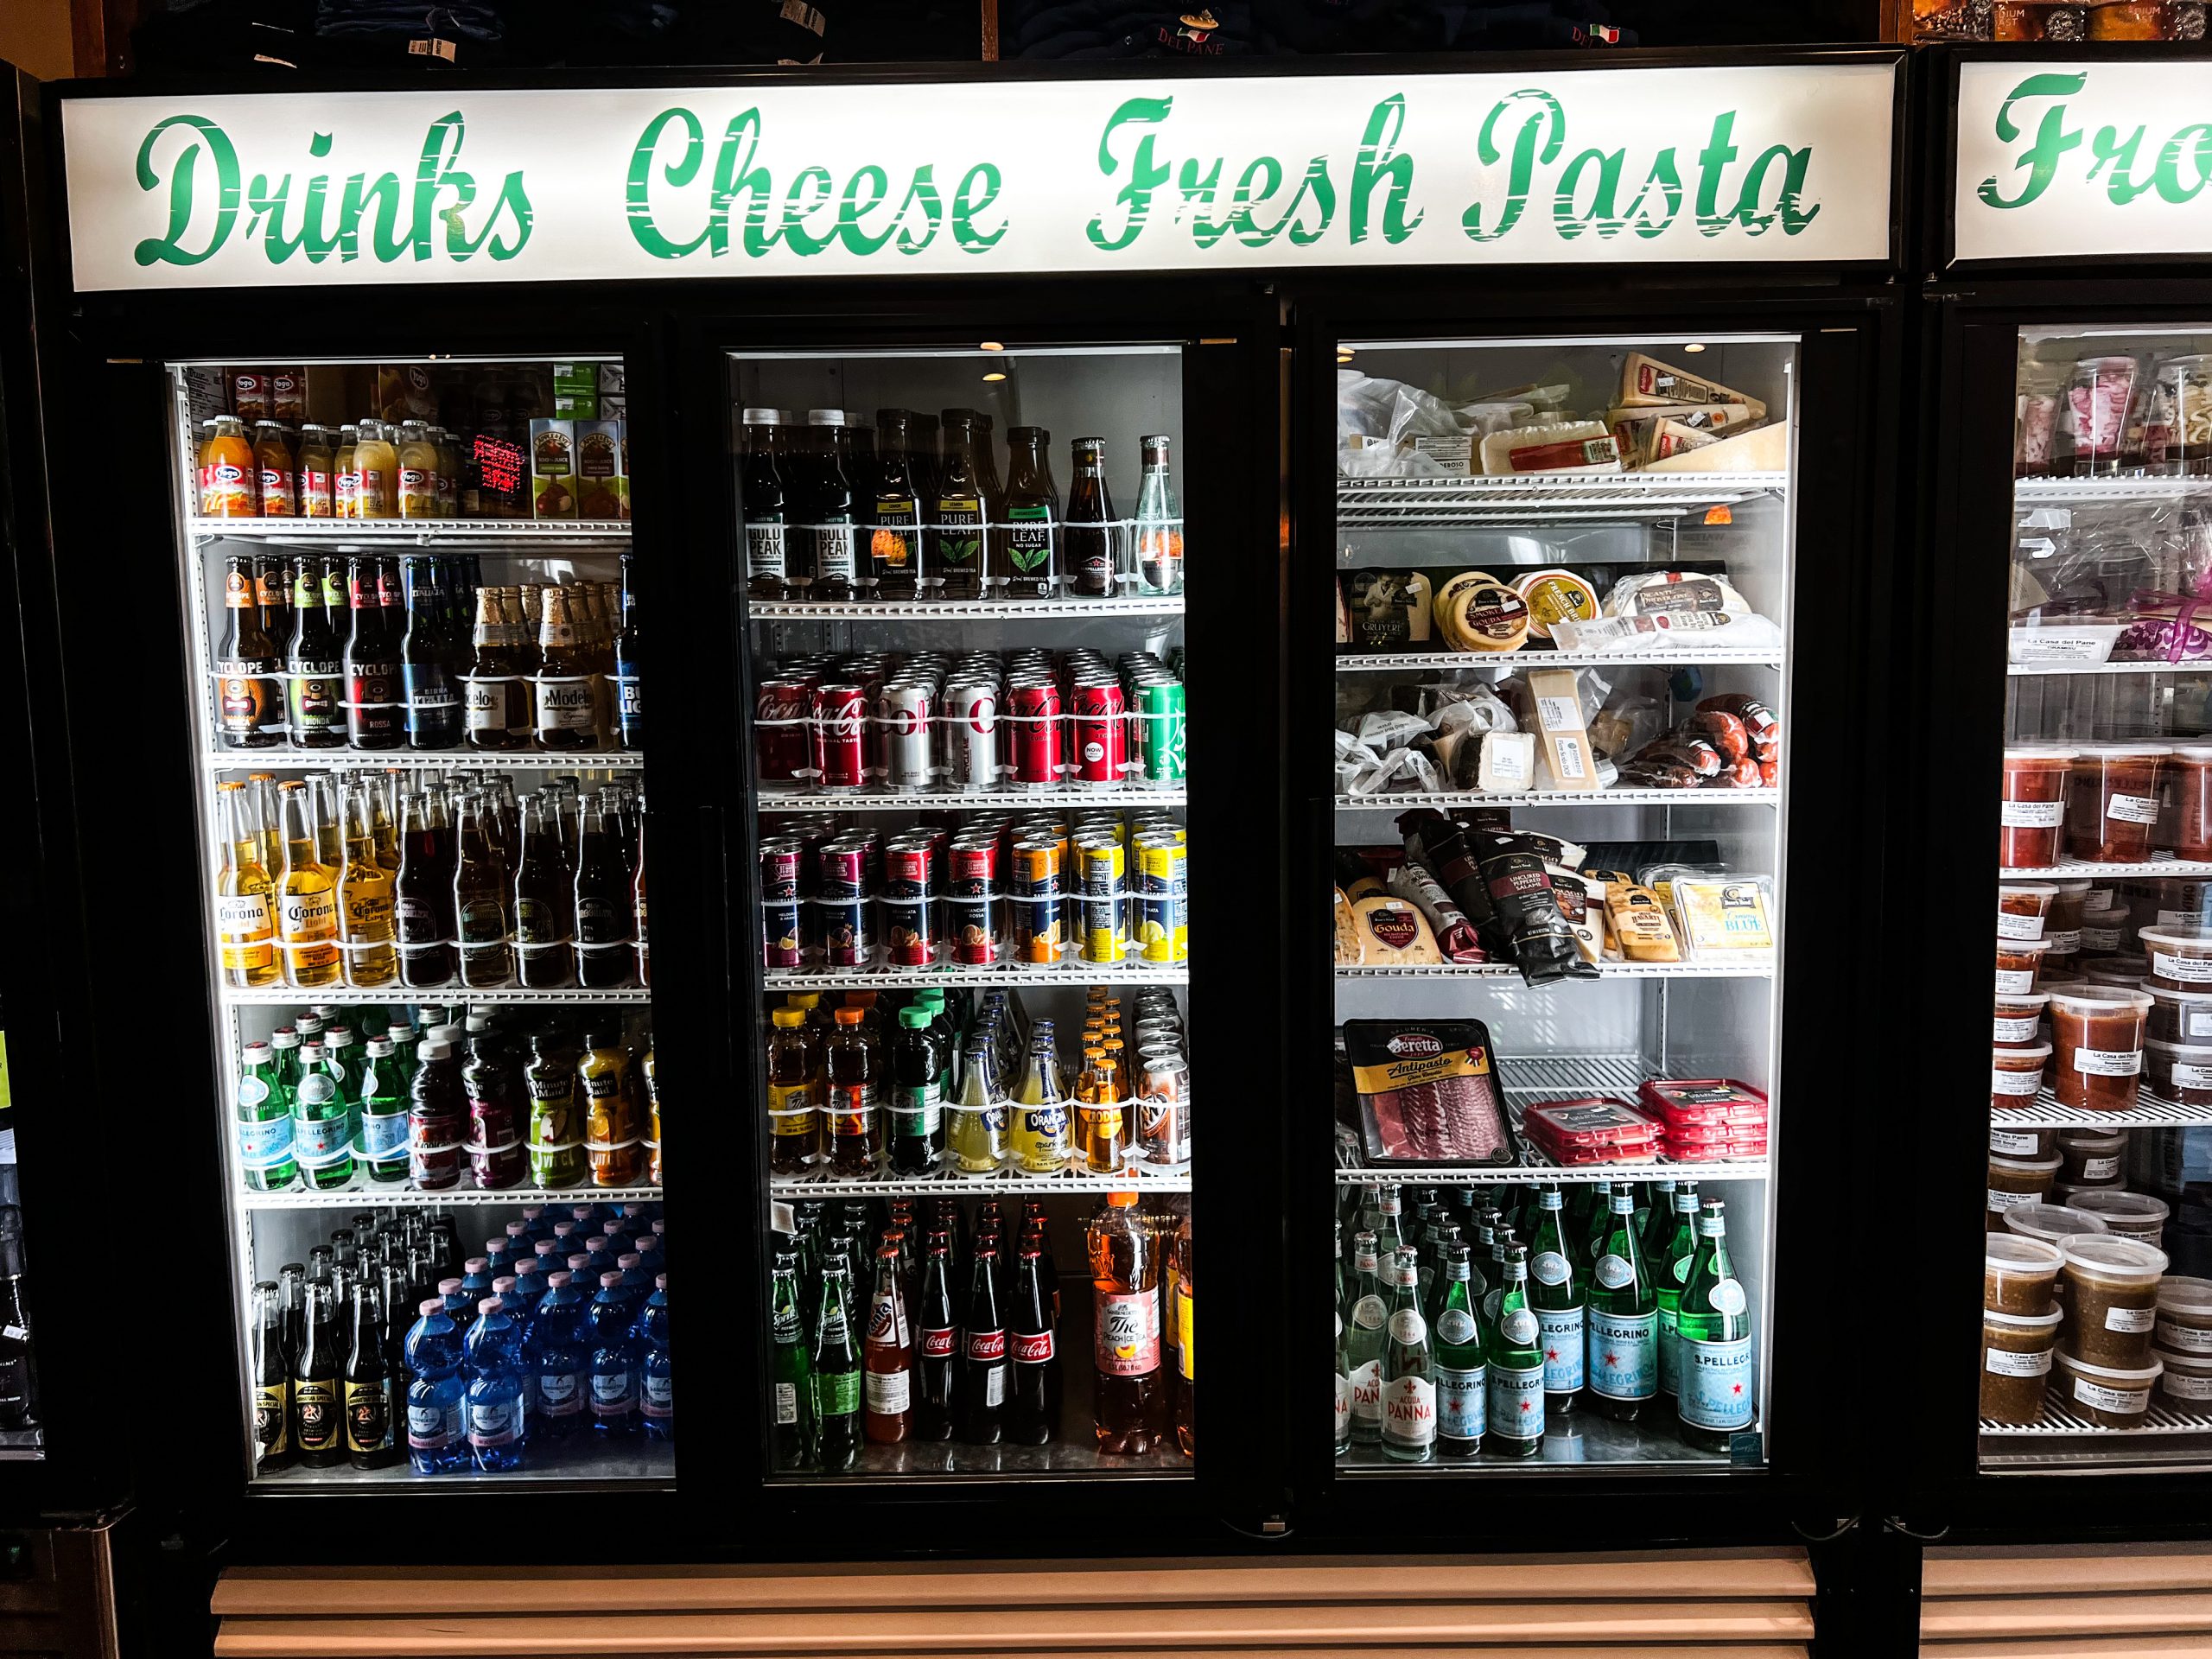 Additional to-go items like drinks and cheese